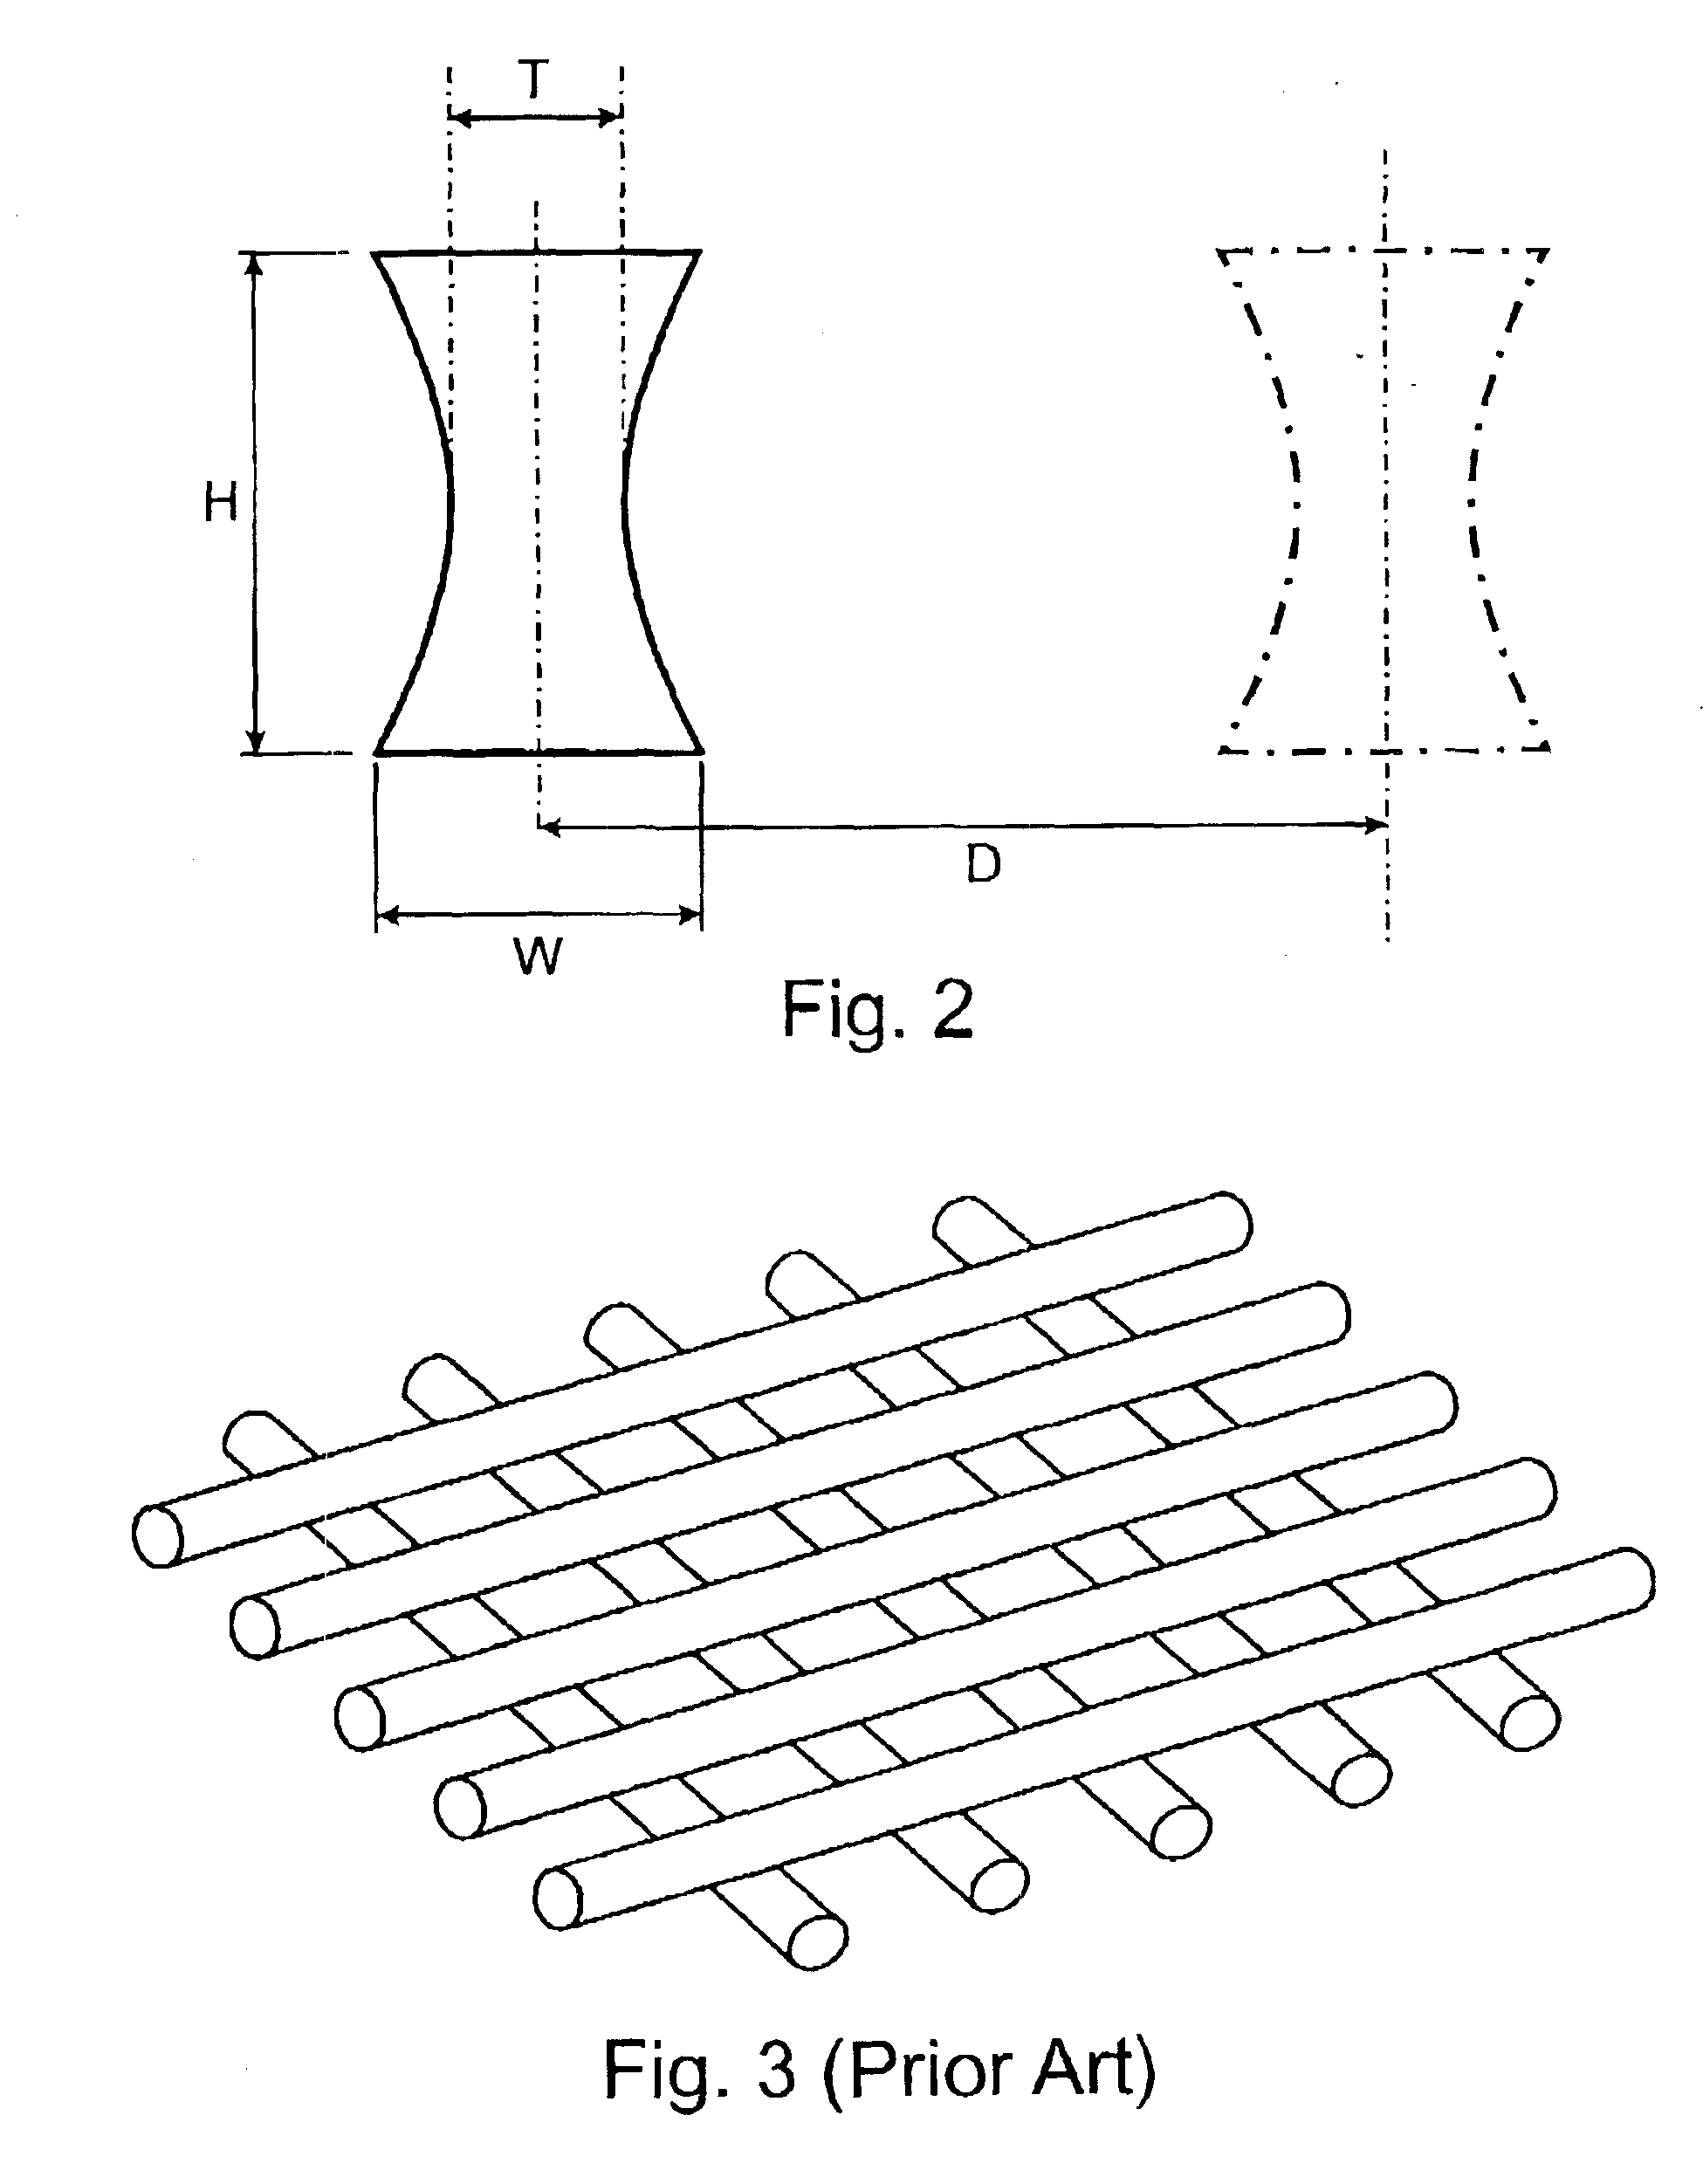 Feed spacers for filtration membrane modules